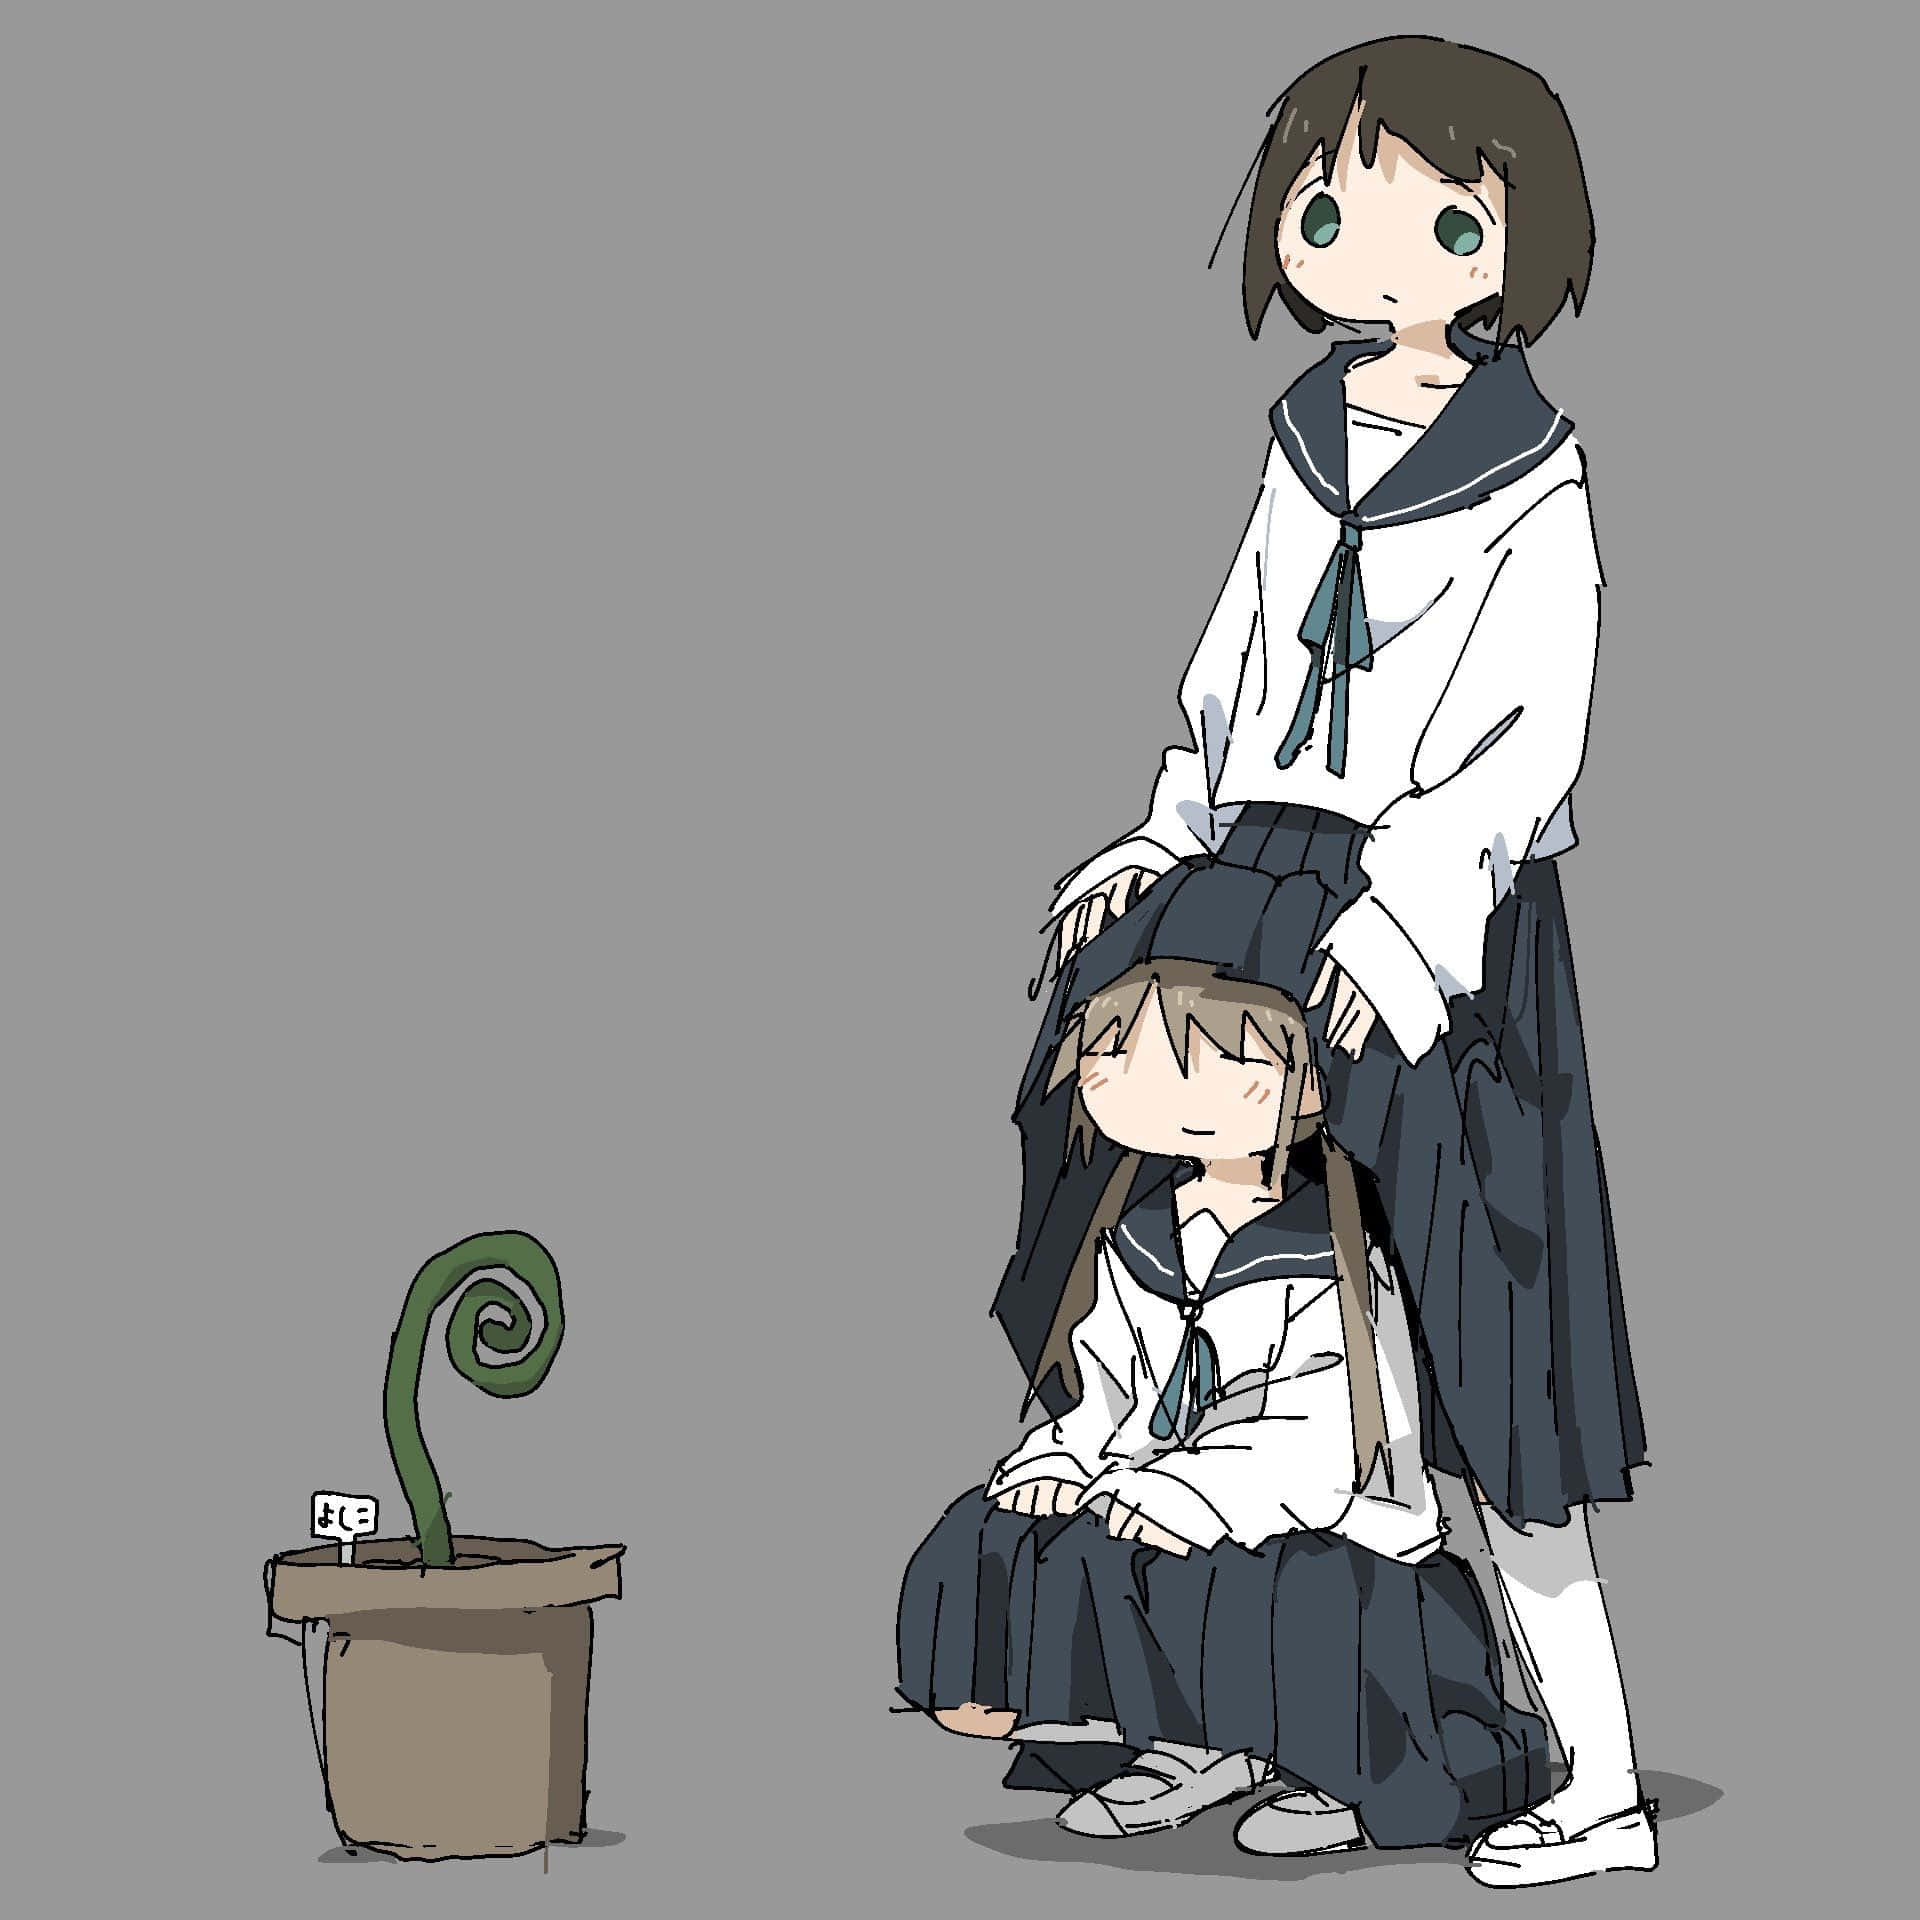 Two Girls In School Uniforms Standing Next To A Potted Plant Wallpaper